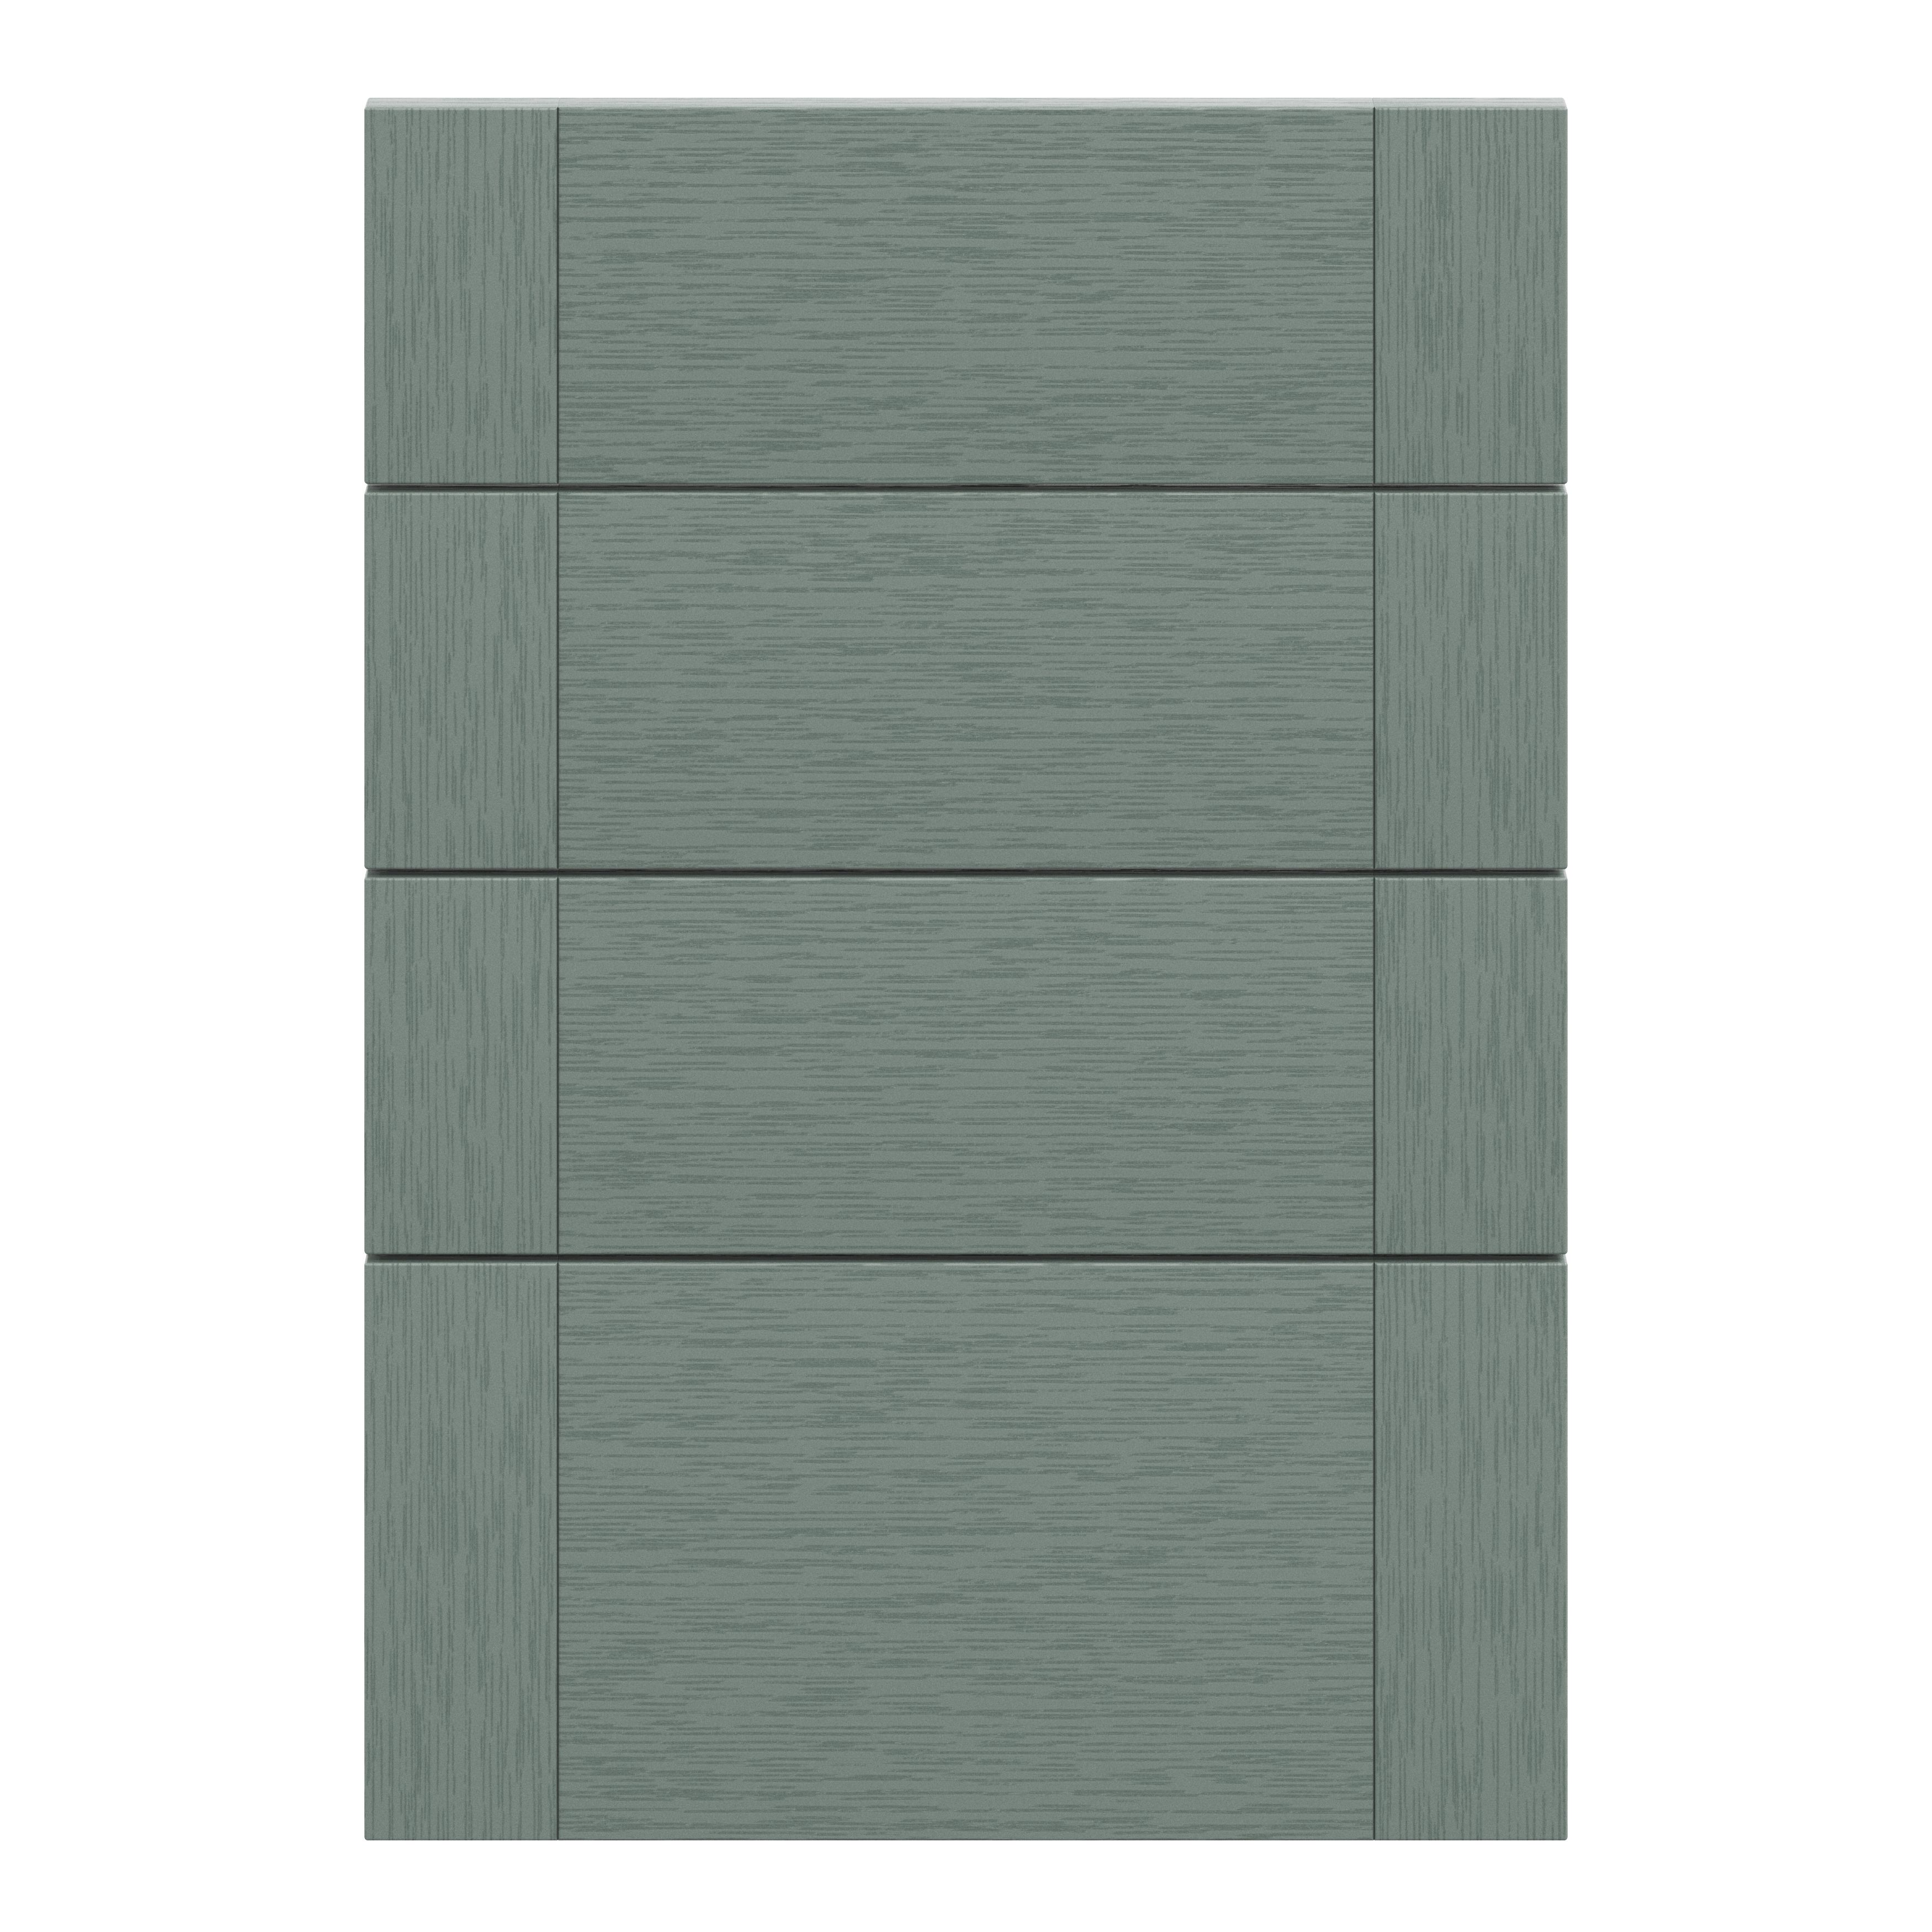 GoodHome Alpinia Matt Green Painted Wood Effect Shaker Drawer front (W)500mm, Pack of 4